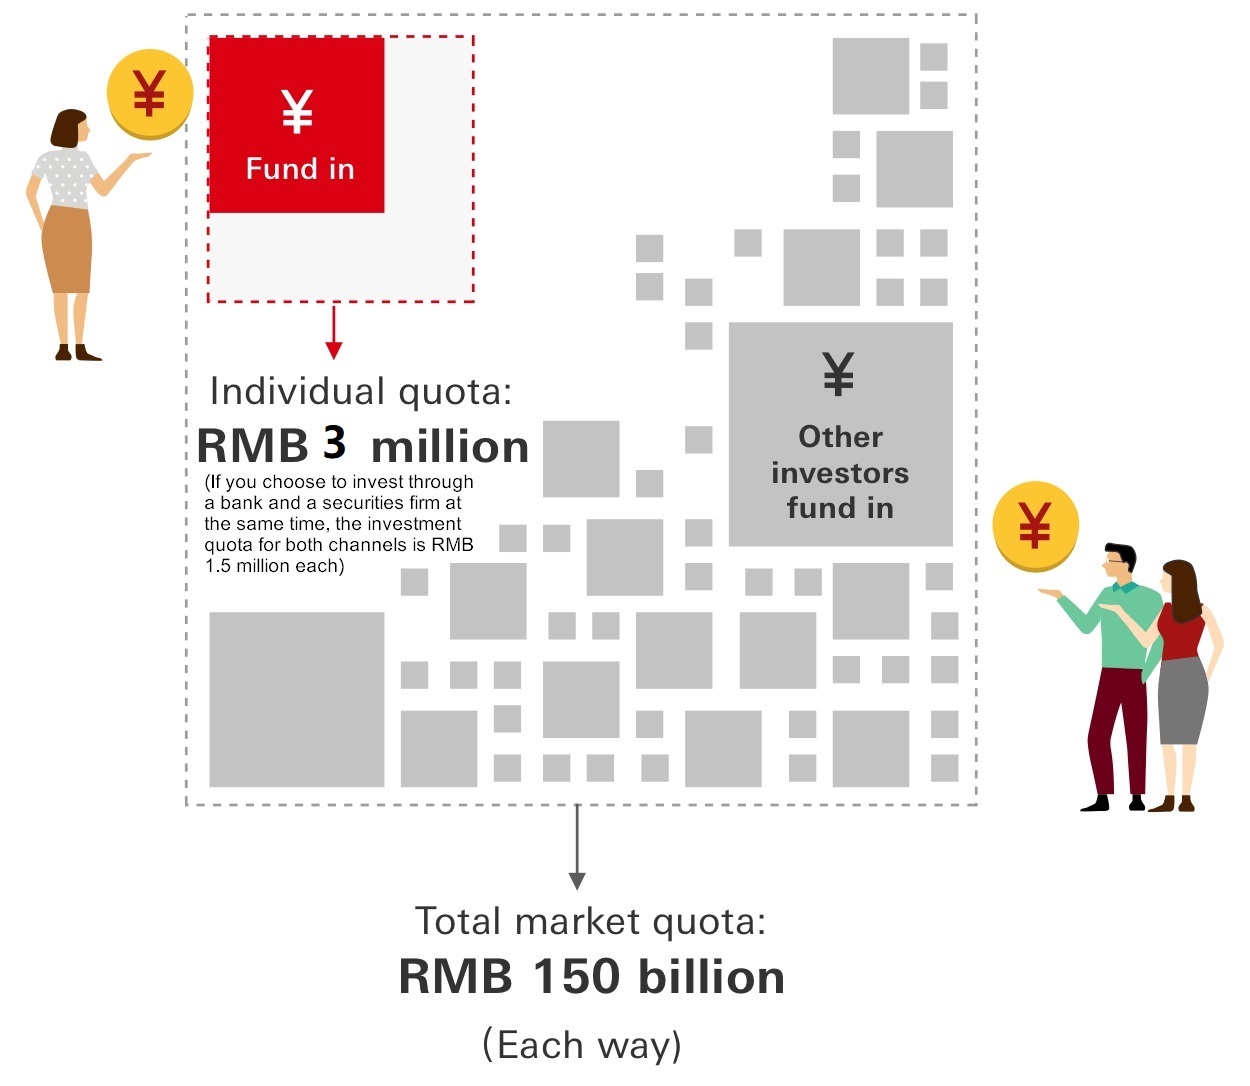 Individual investor quota is set at RMB 3 million. If you choose to invest through a securities firm in addition to HSBC GBA Wealth Management Connect, the investment quota allocated between the channels is RMB 1.5 million each.